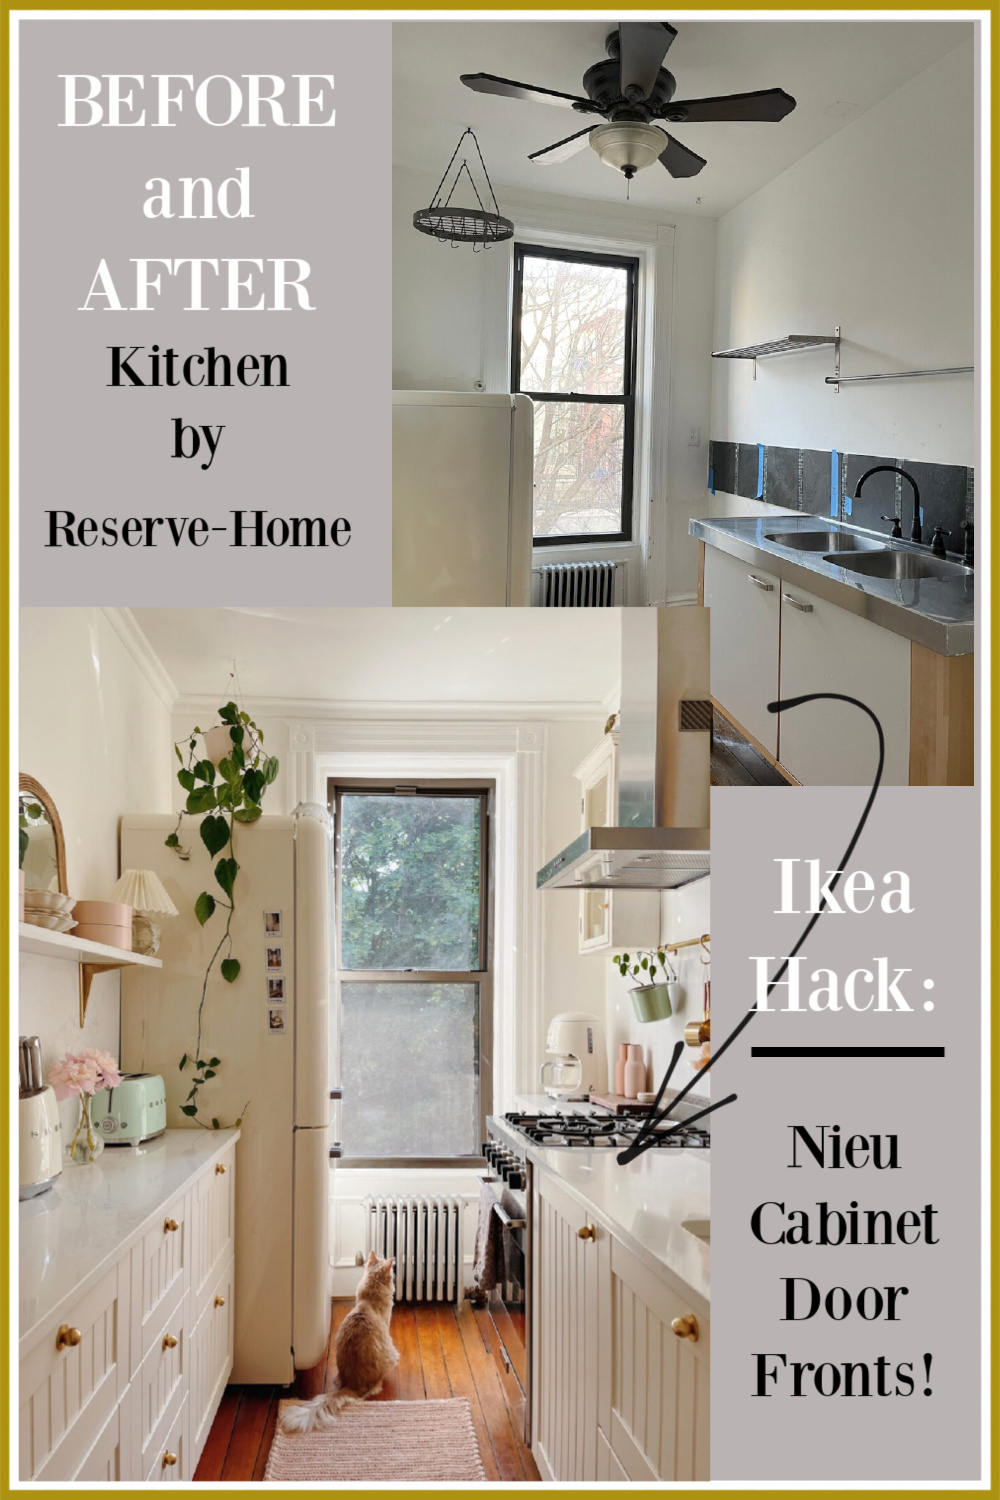 Ikea hack: cabinet door fronts from NIEU for a customized cottage look in a Brooklyn Brownstone kitchen by ReserveHome. #ikeahack #kitchendesign #kitchencabinets #cabinetrefacing